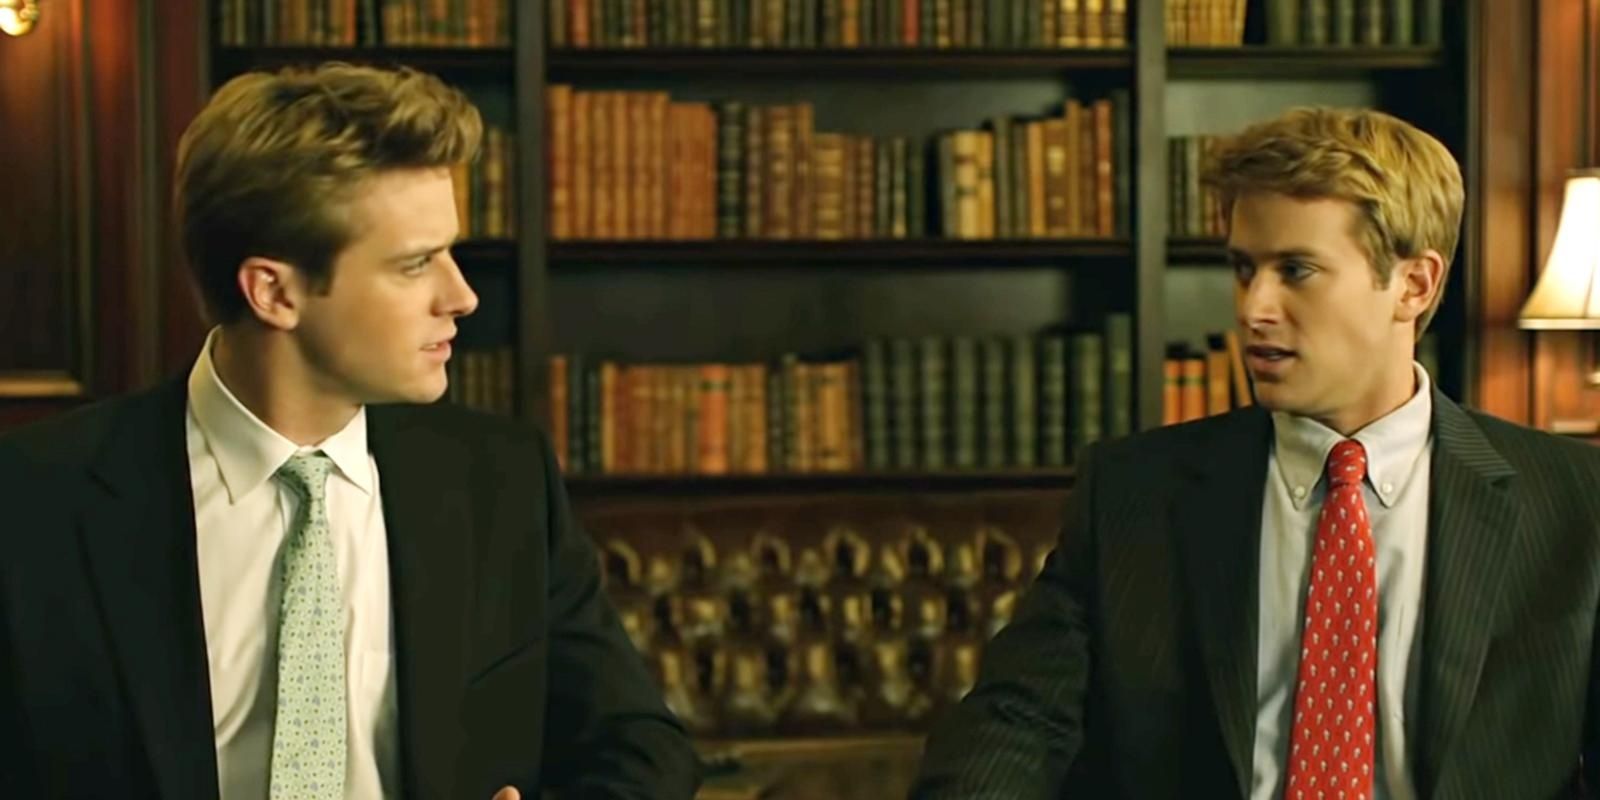 The Winklevoss twins argue about who invented Facebook in The Social Network